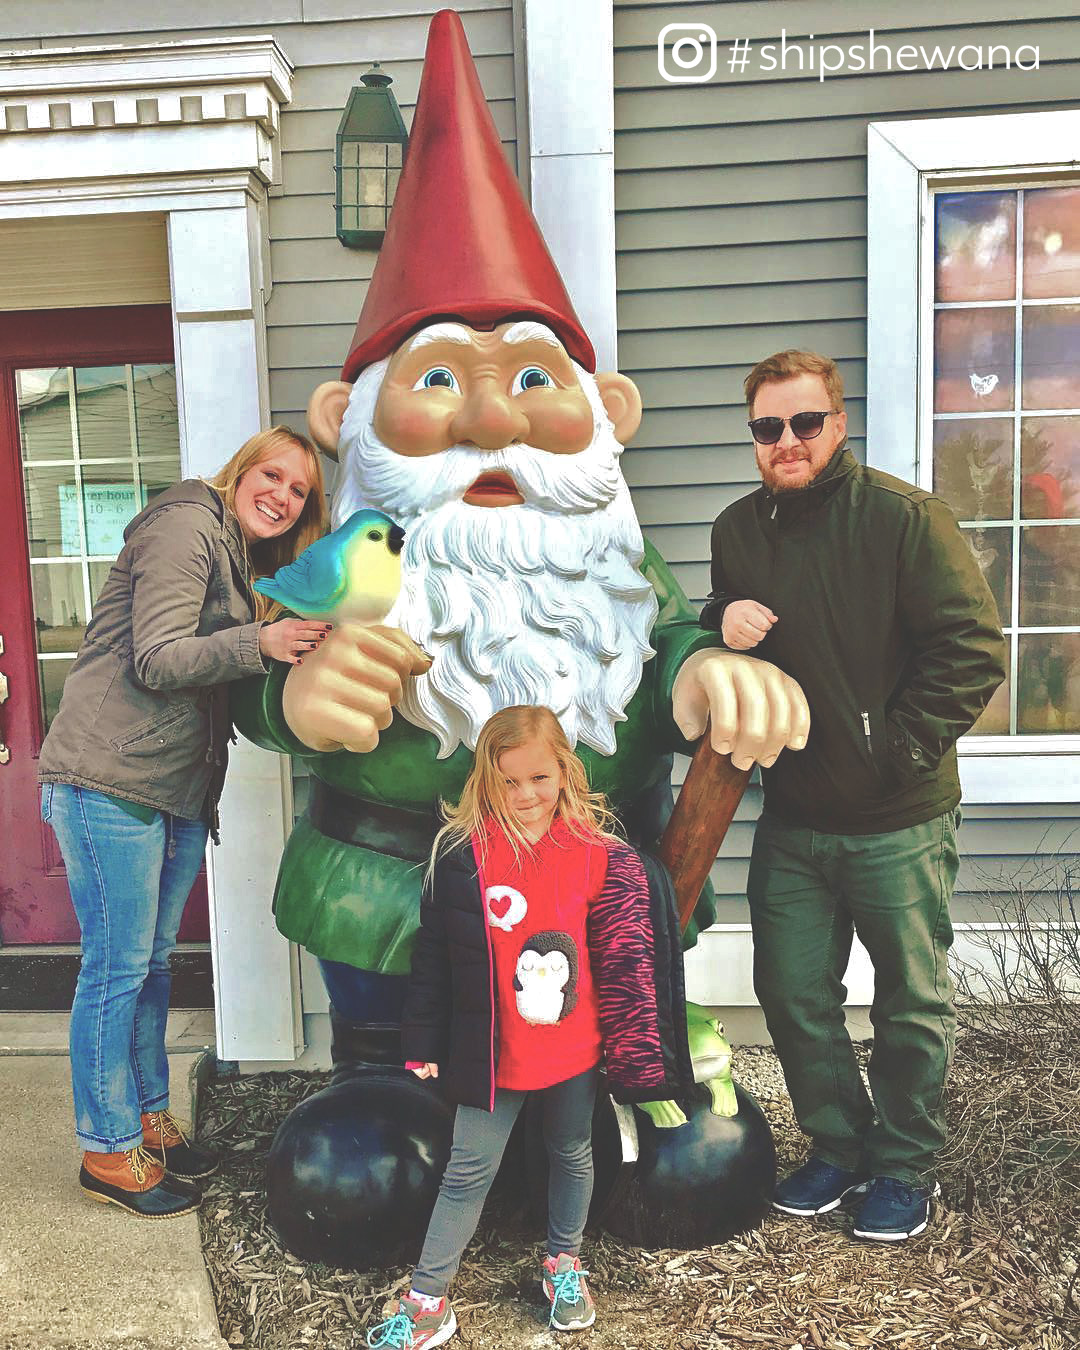 People posing with giant gnome